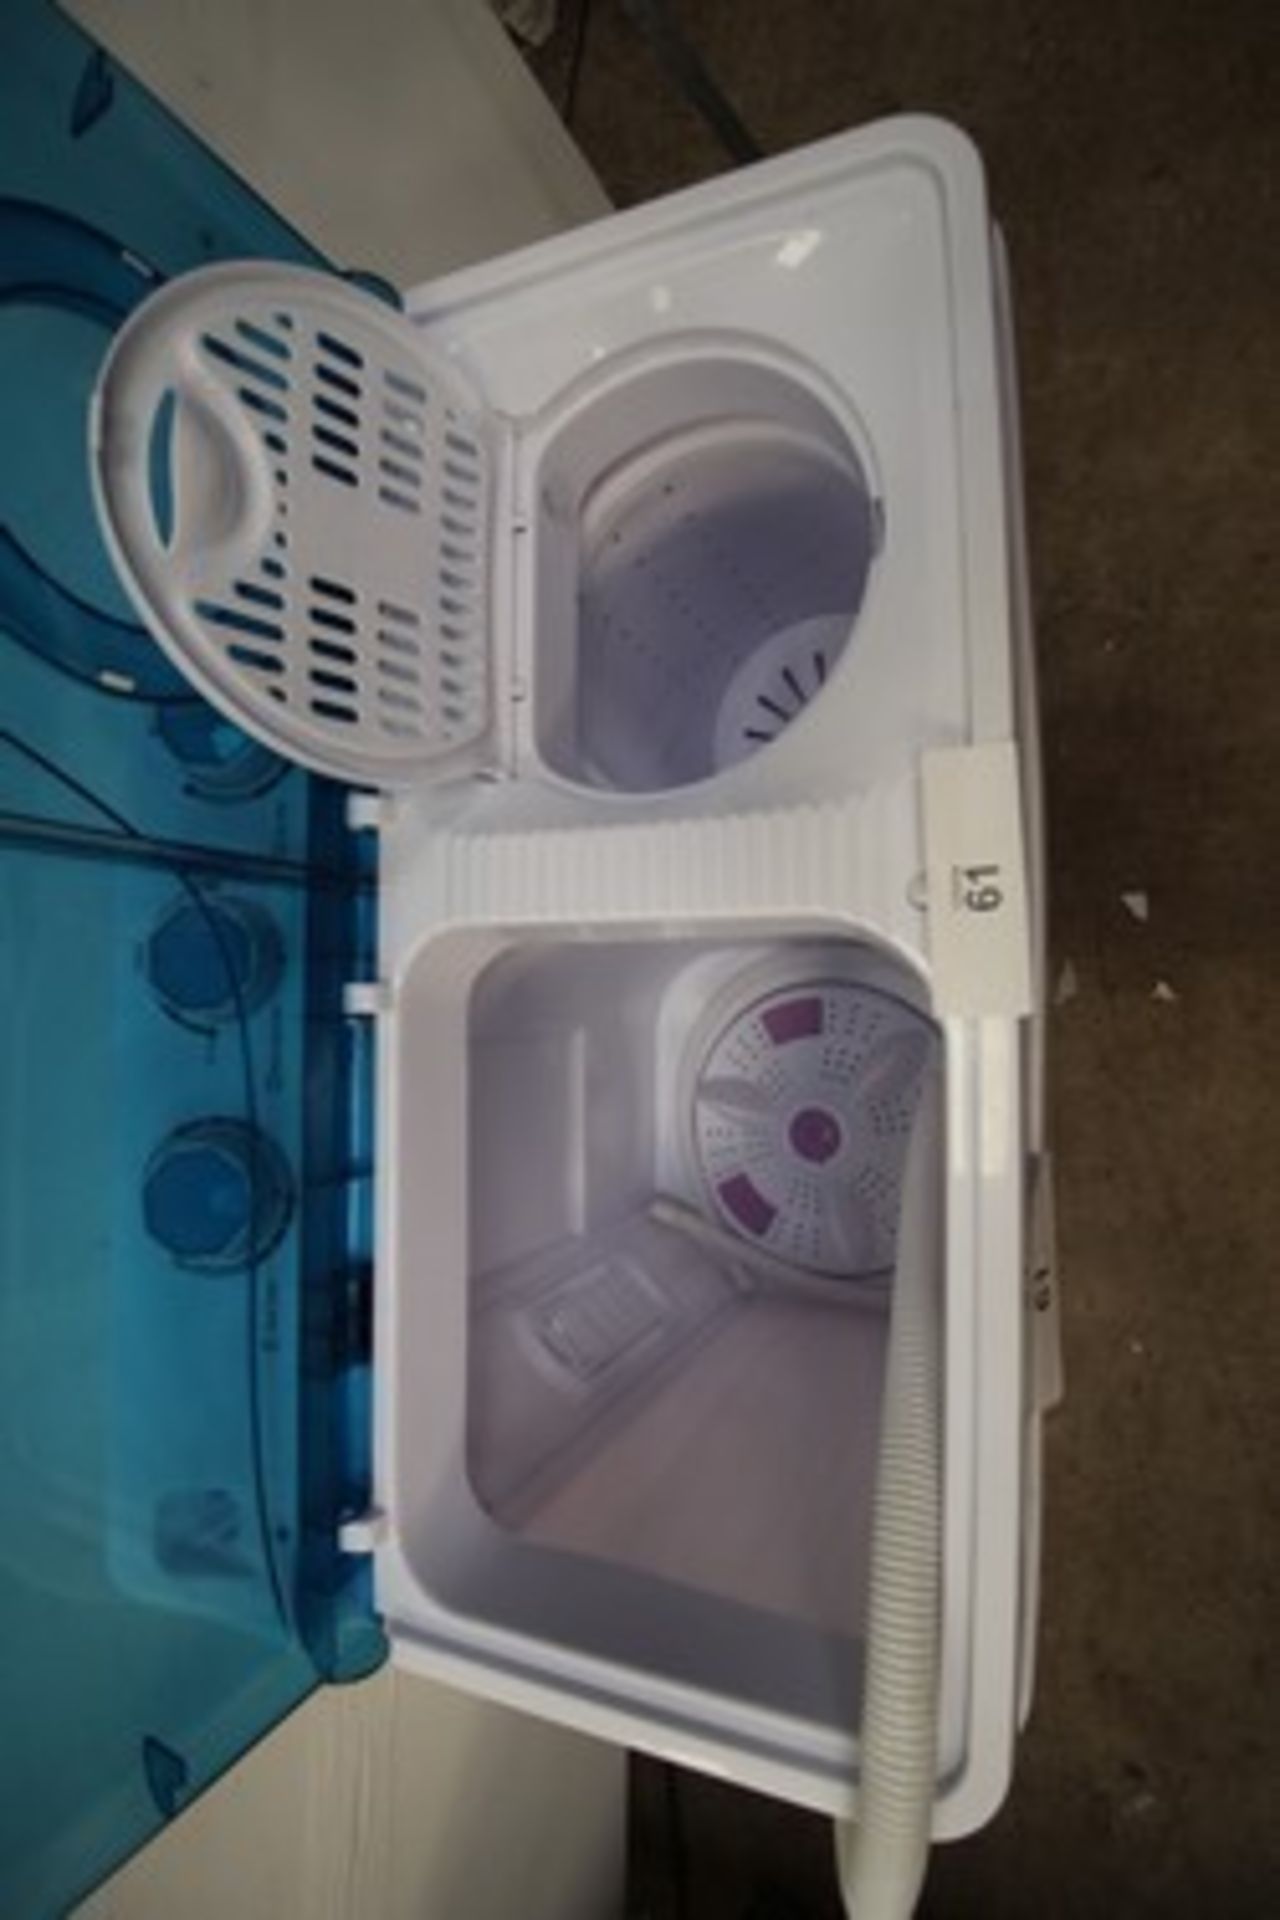 1 x Costway portable washing machine, cracked case top right, model No: FP10366GB, 6.5kg capacity, - Image 2 of 2